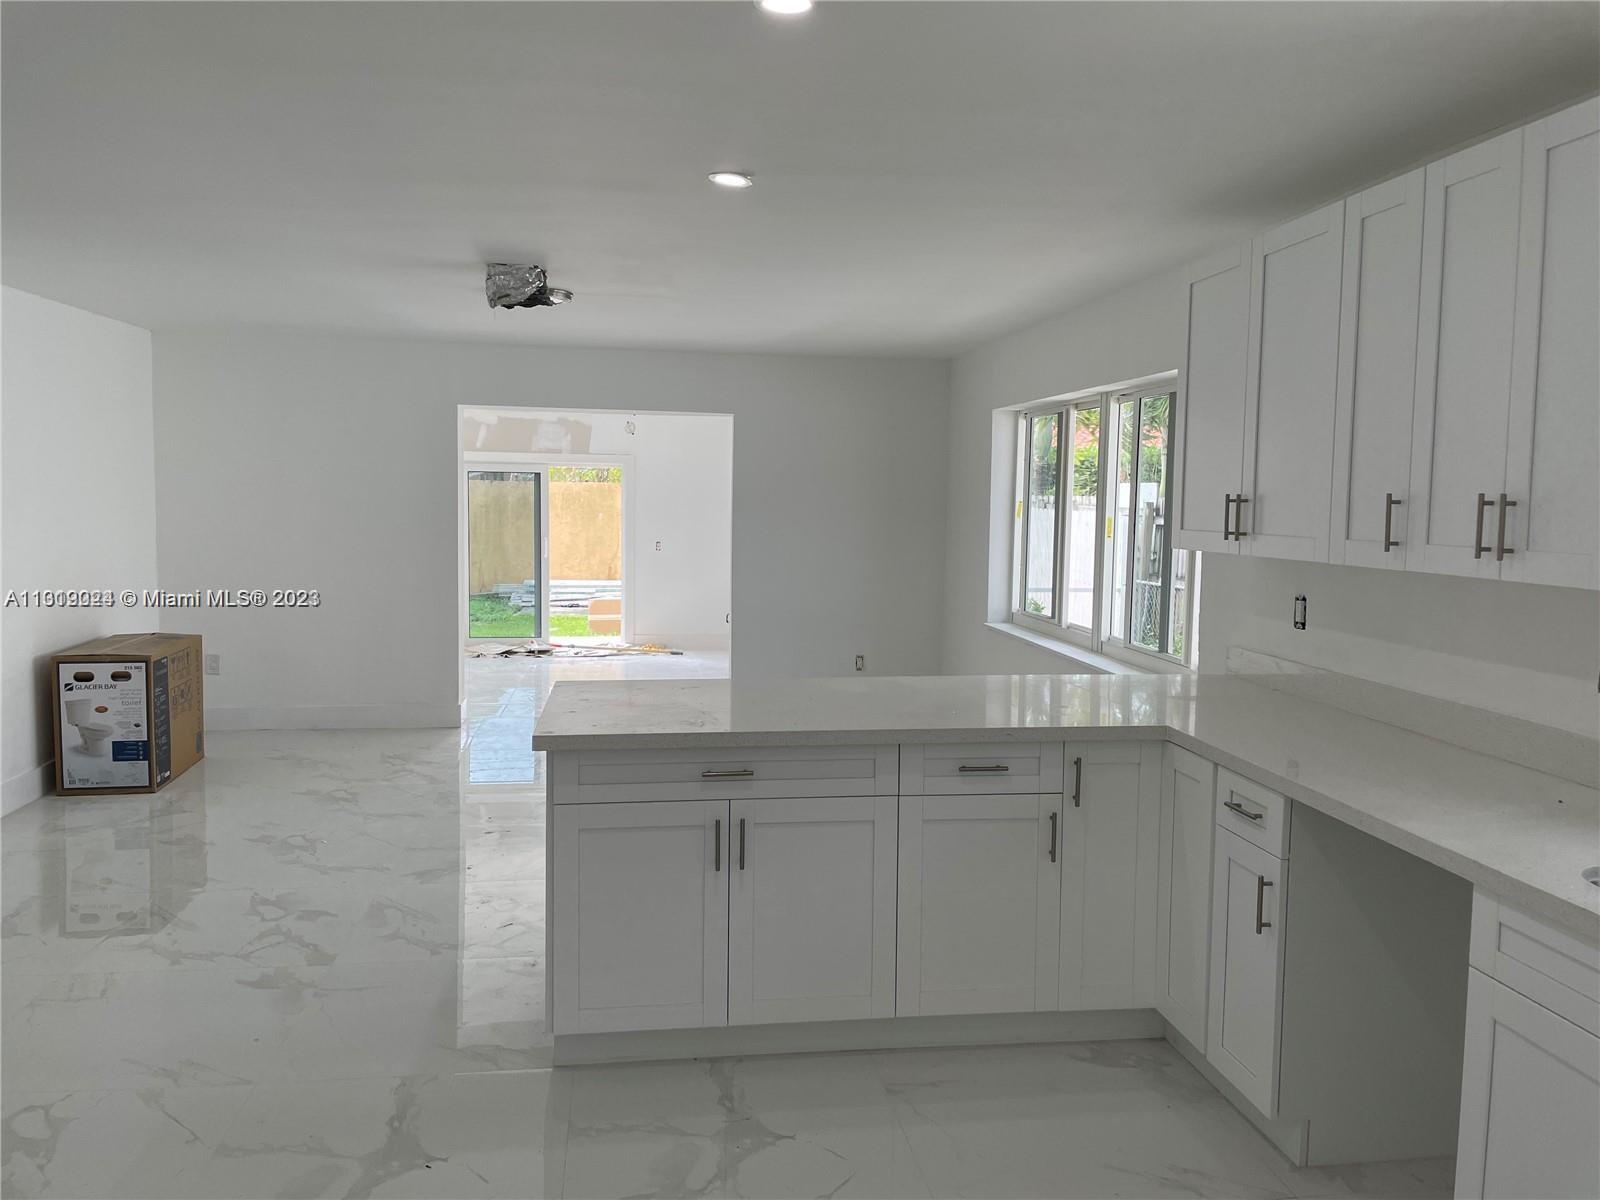 Photo 30 of 7650 4th St in Miami - MLS A11319024